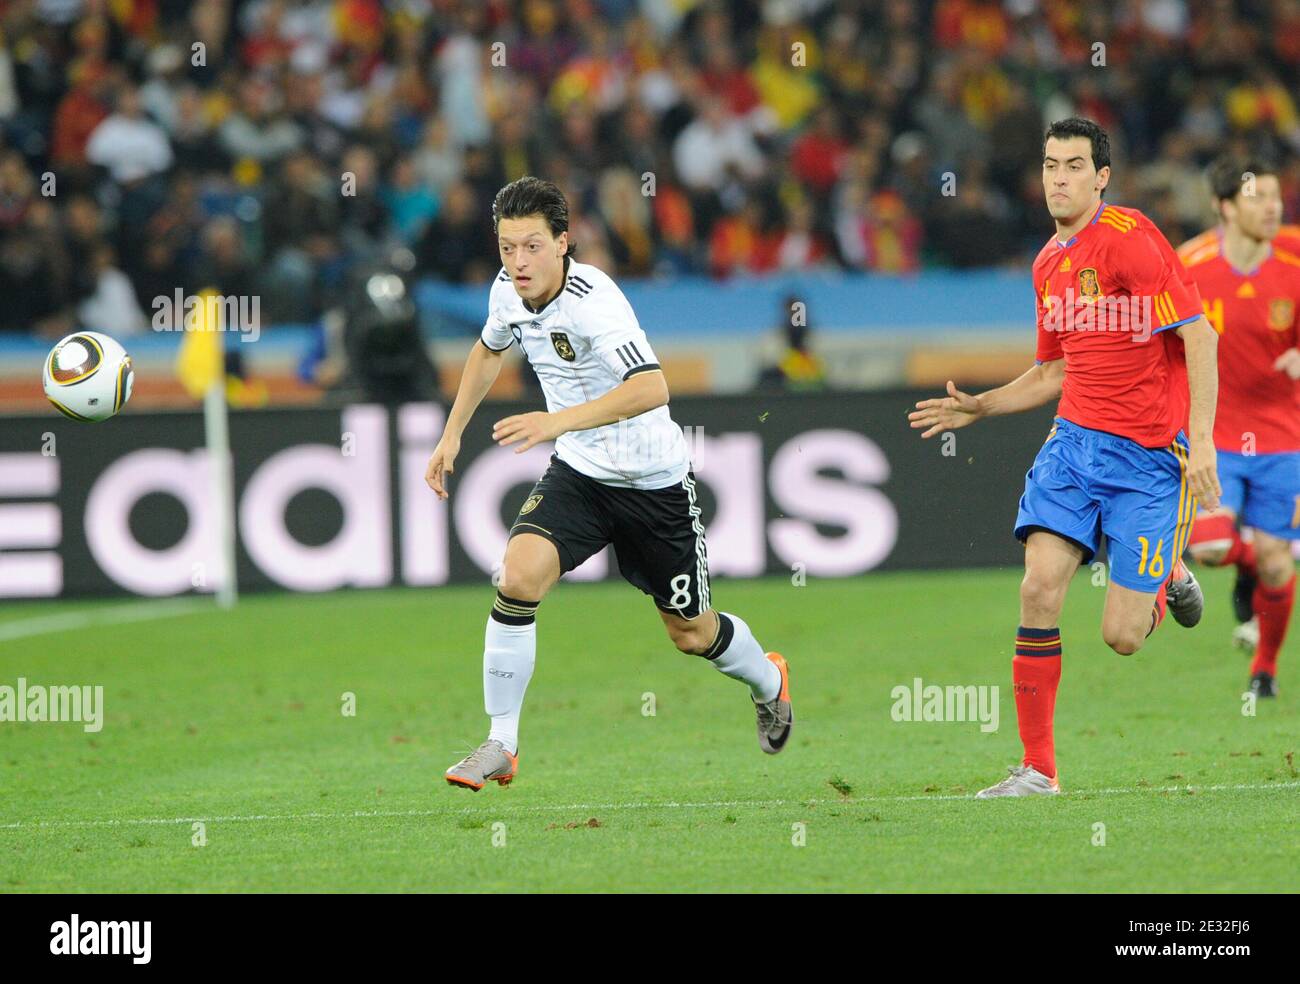 Spain's Sergio Busquets battles for the ball with Germany's Mesut Oezil during the 2010 FIFA World Cup South Africa, Semi-Final, Soccer match, Spain vs Germany at Moses Mabhida football stadium in Durban, South Africa on July 7th, 2010. Spain won 1-0. Photo by Henri Szwarc/ABACAPRESS.COM Stock Photo